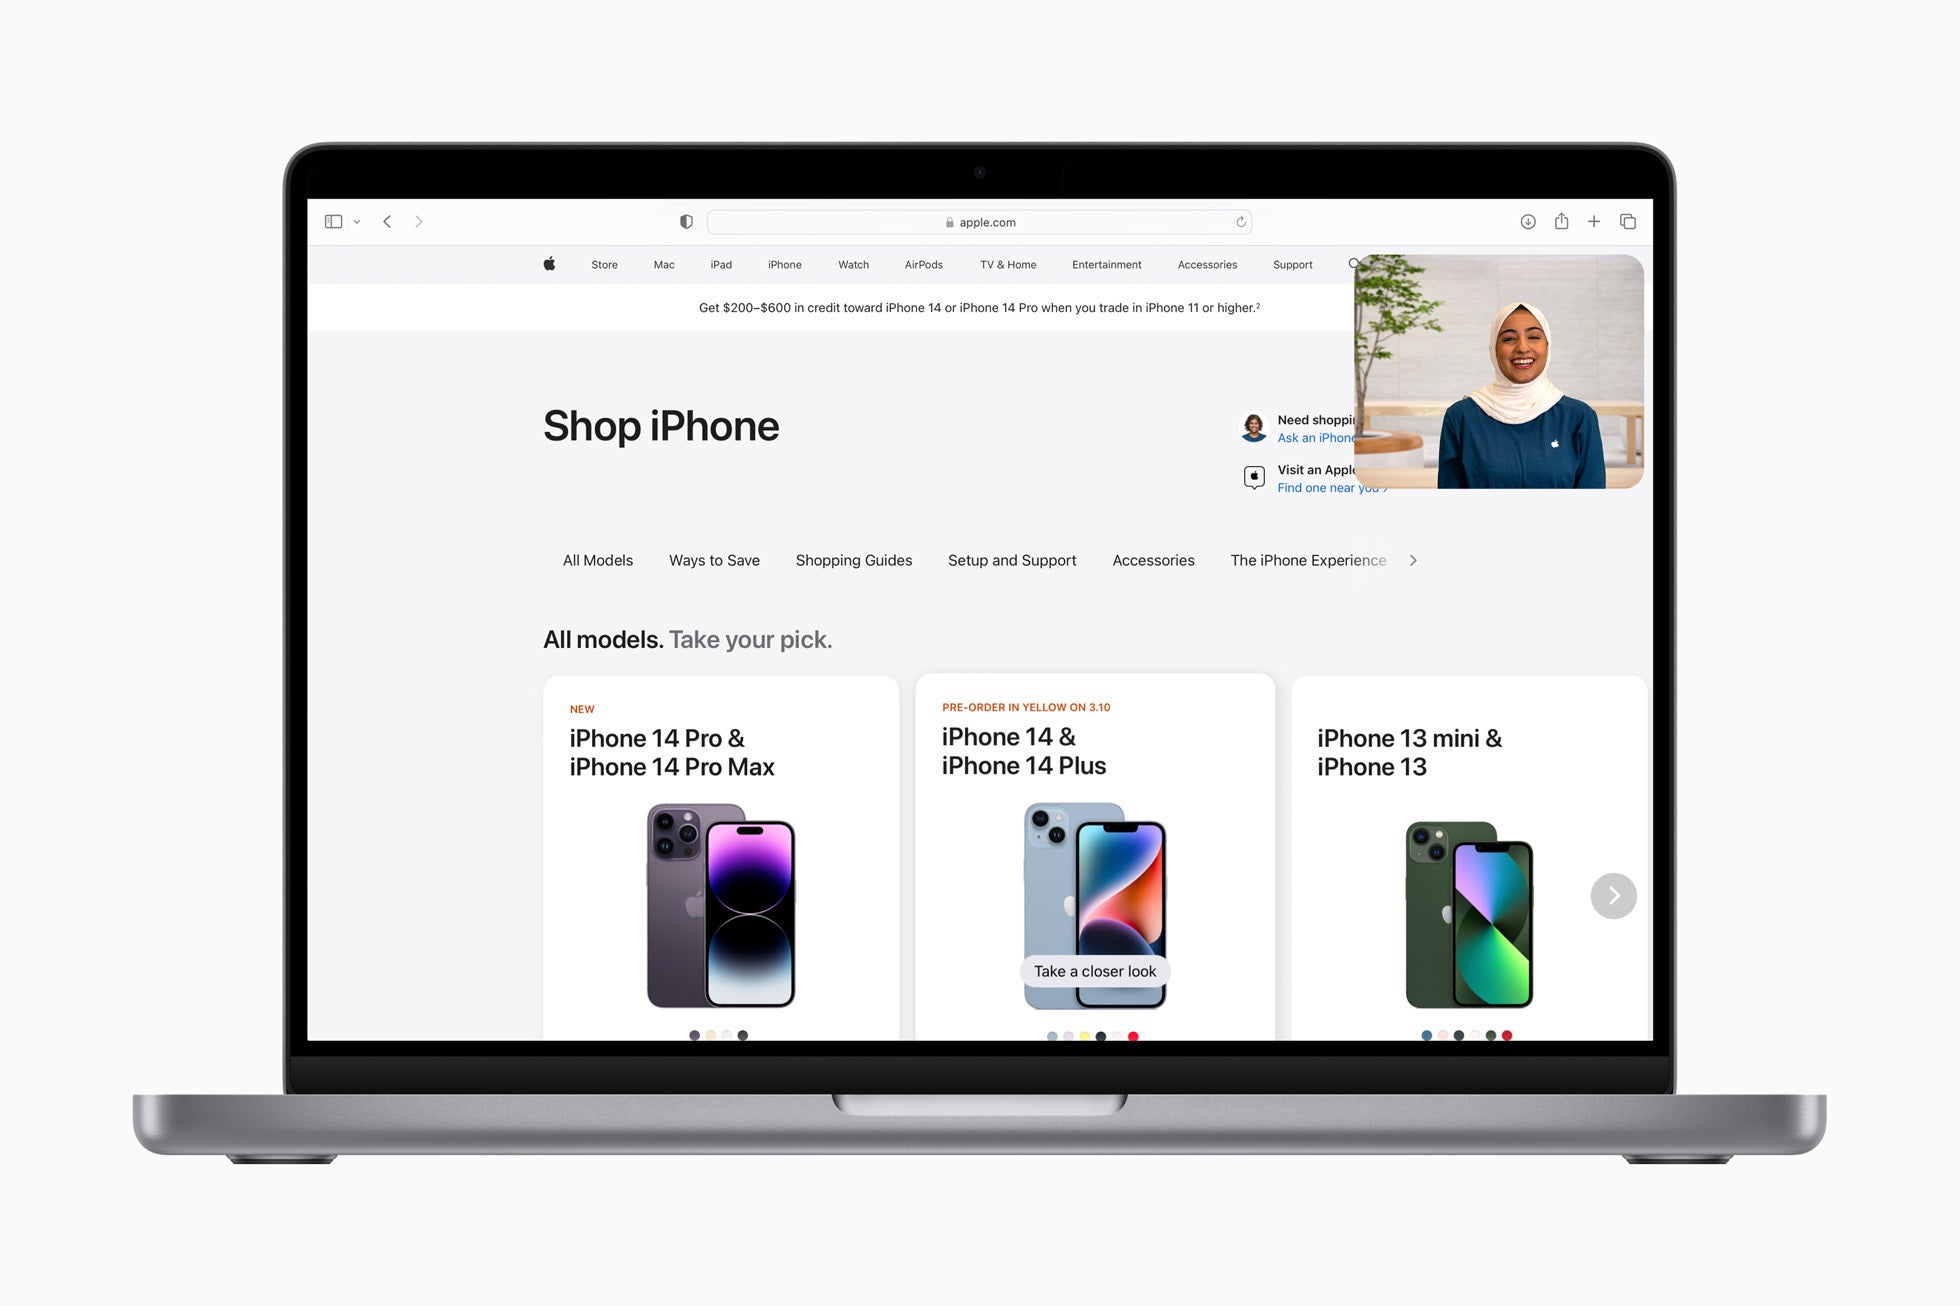 Those shopping for an iPhone can now get help using Apple's new Shop with a Specialist over Video service - Apple adds a new way for you to shop for an iPhone in the states